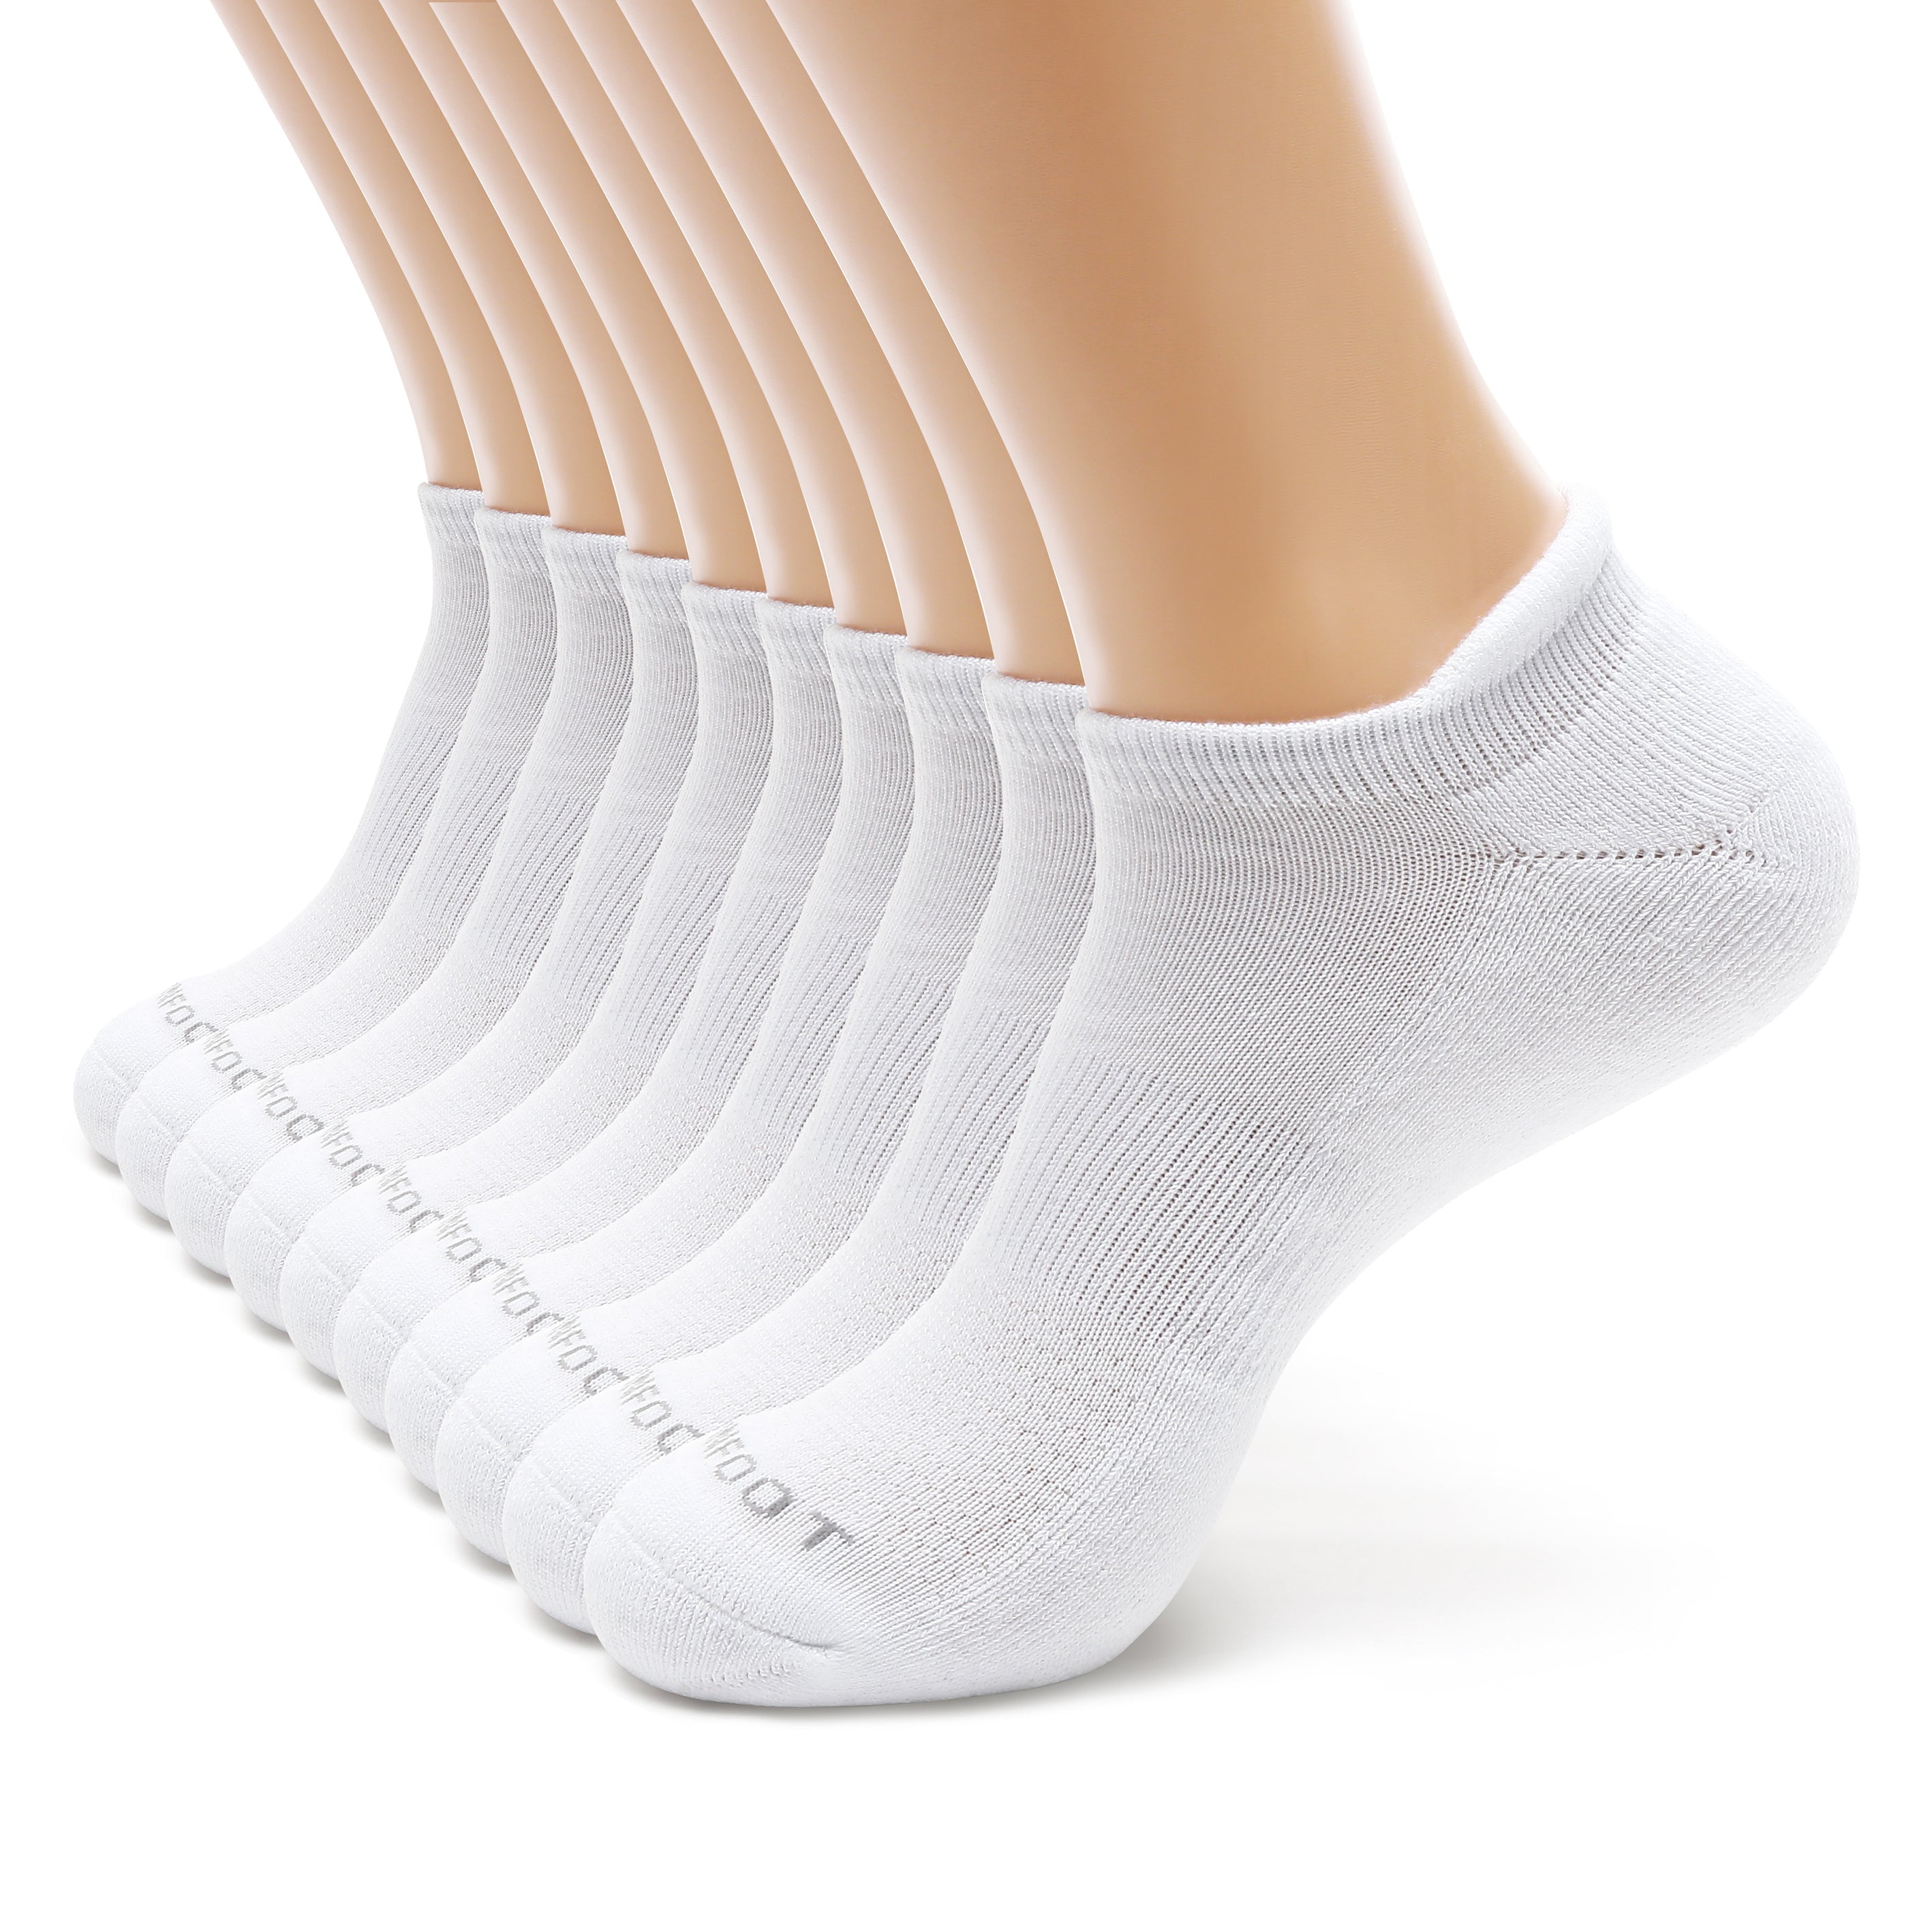 MONFOOT Women's and Men's Athletic Cushioned Heel Tab Ankle Socks, 10 ...